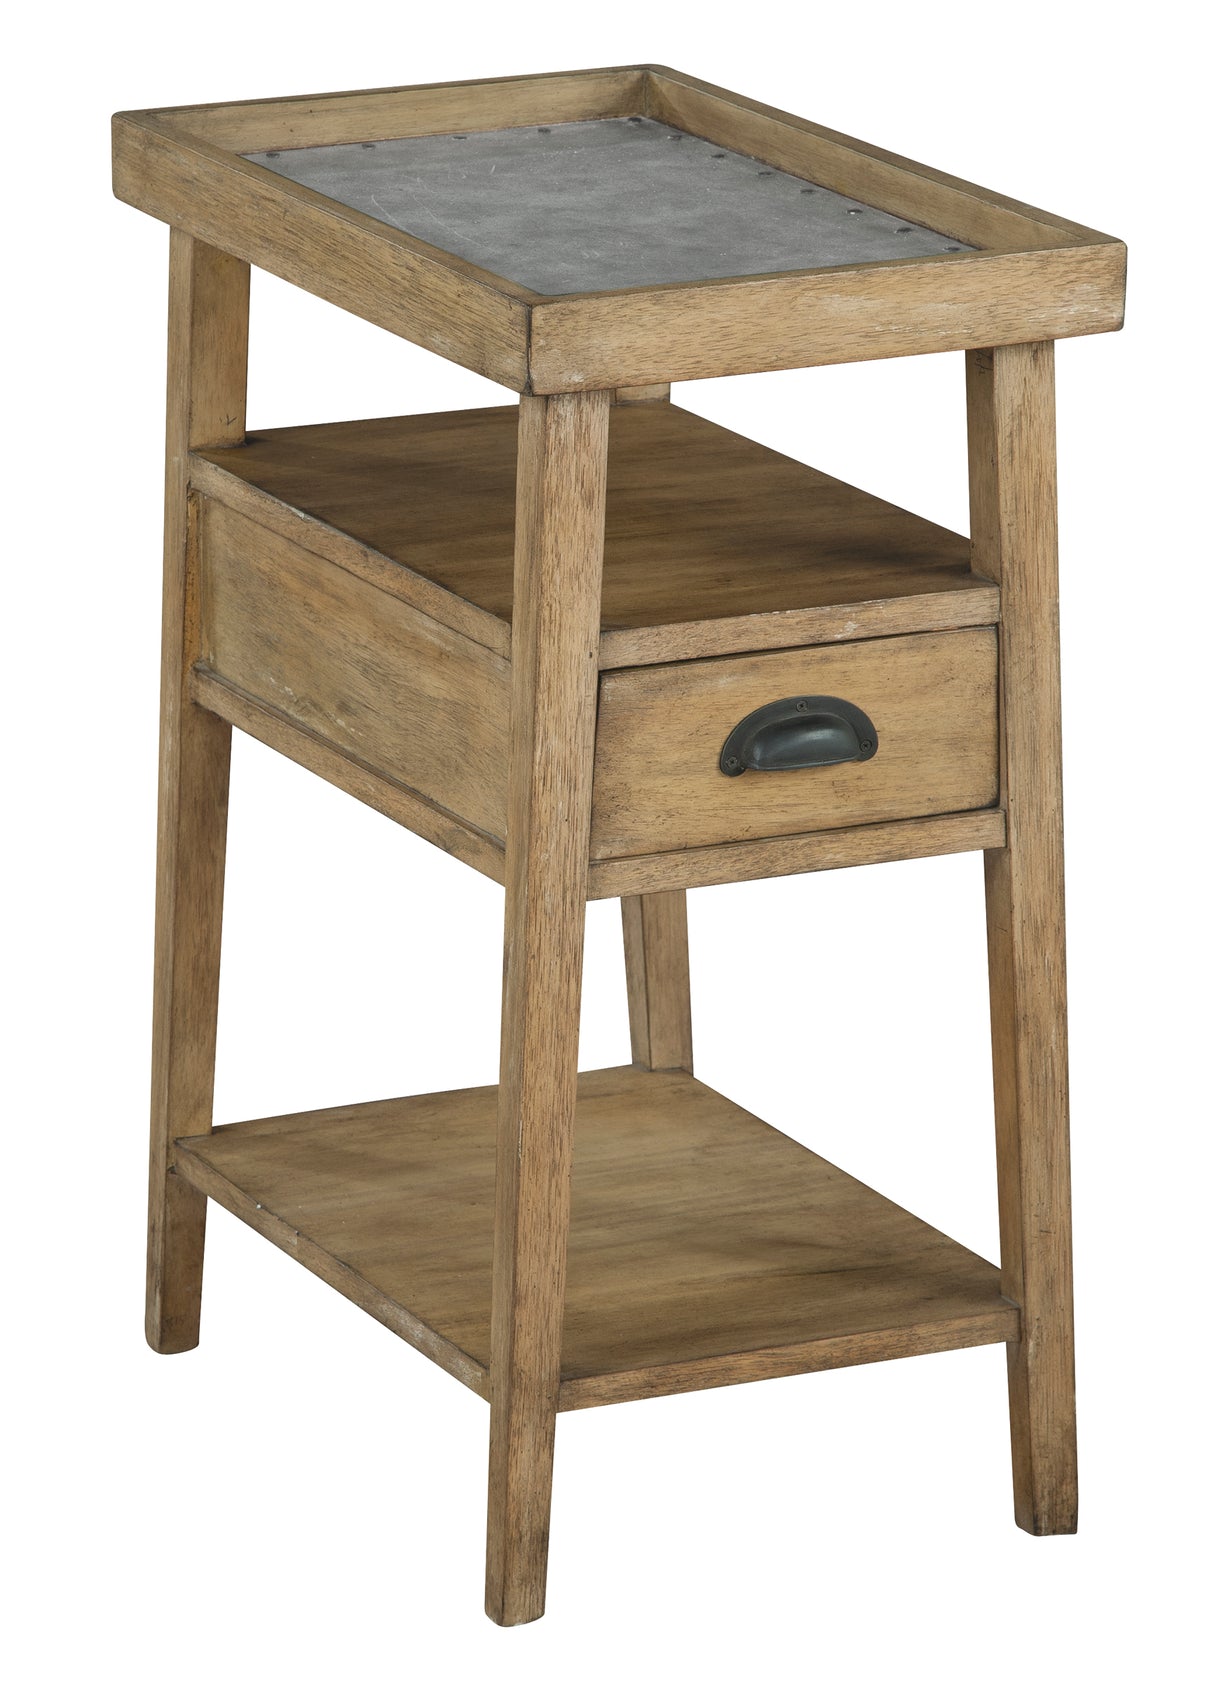 Hekman 27873 Accents 12in. x 20in. x 27in. End Table